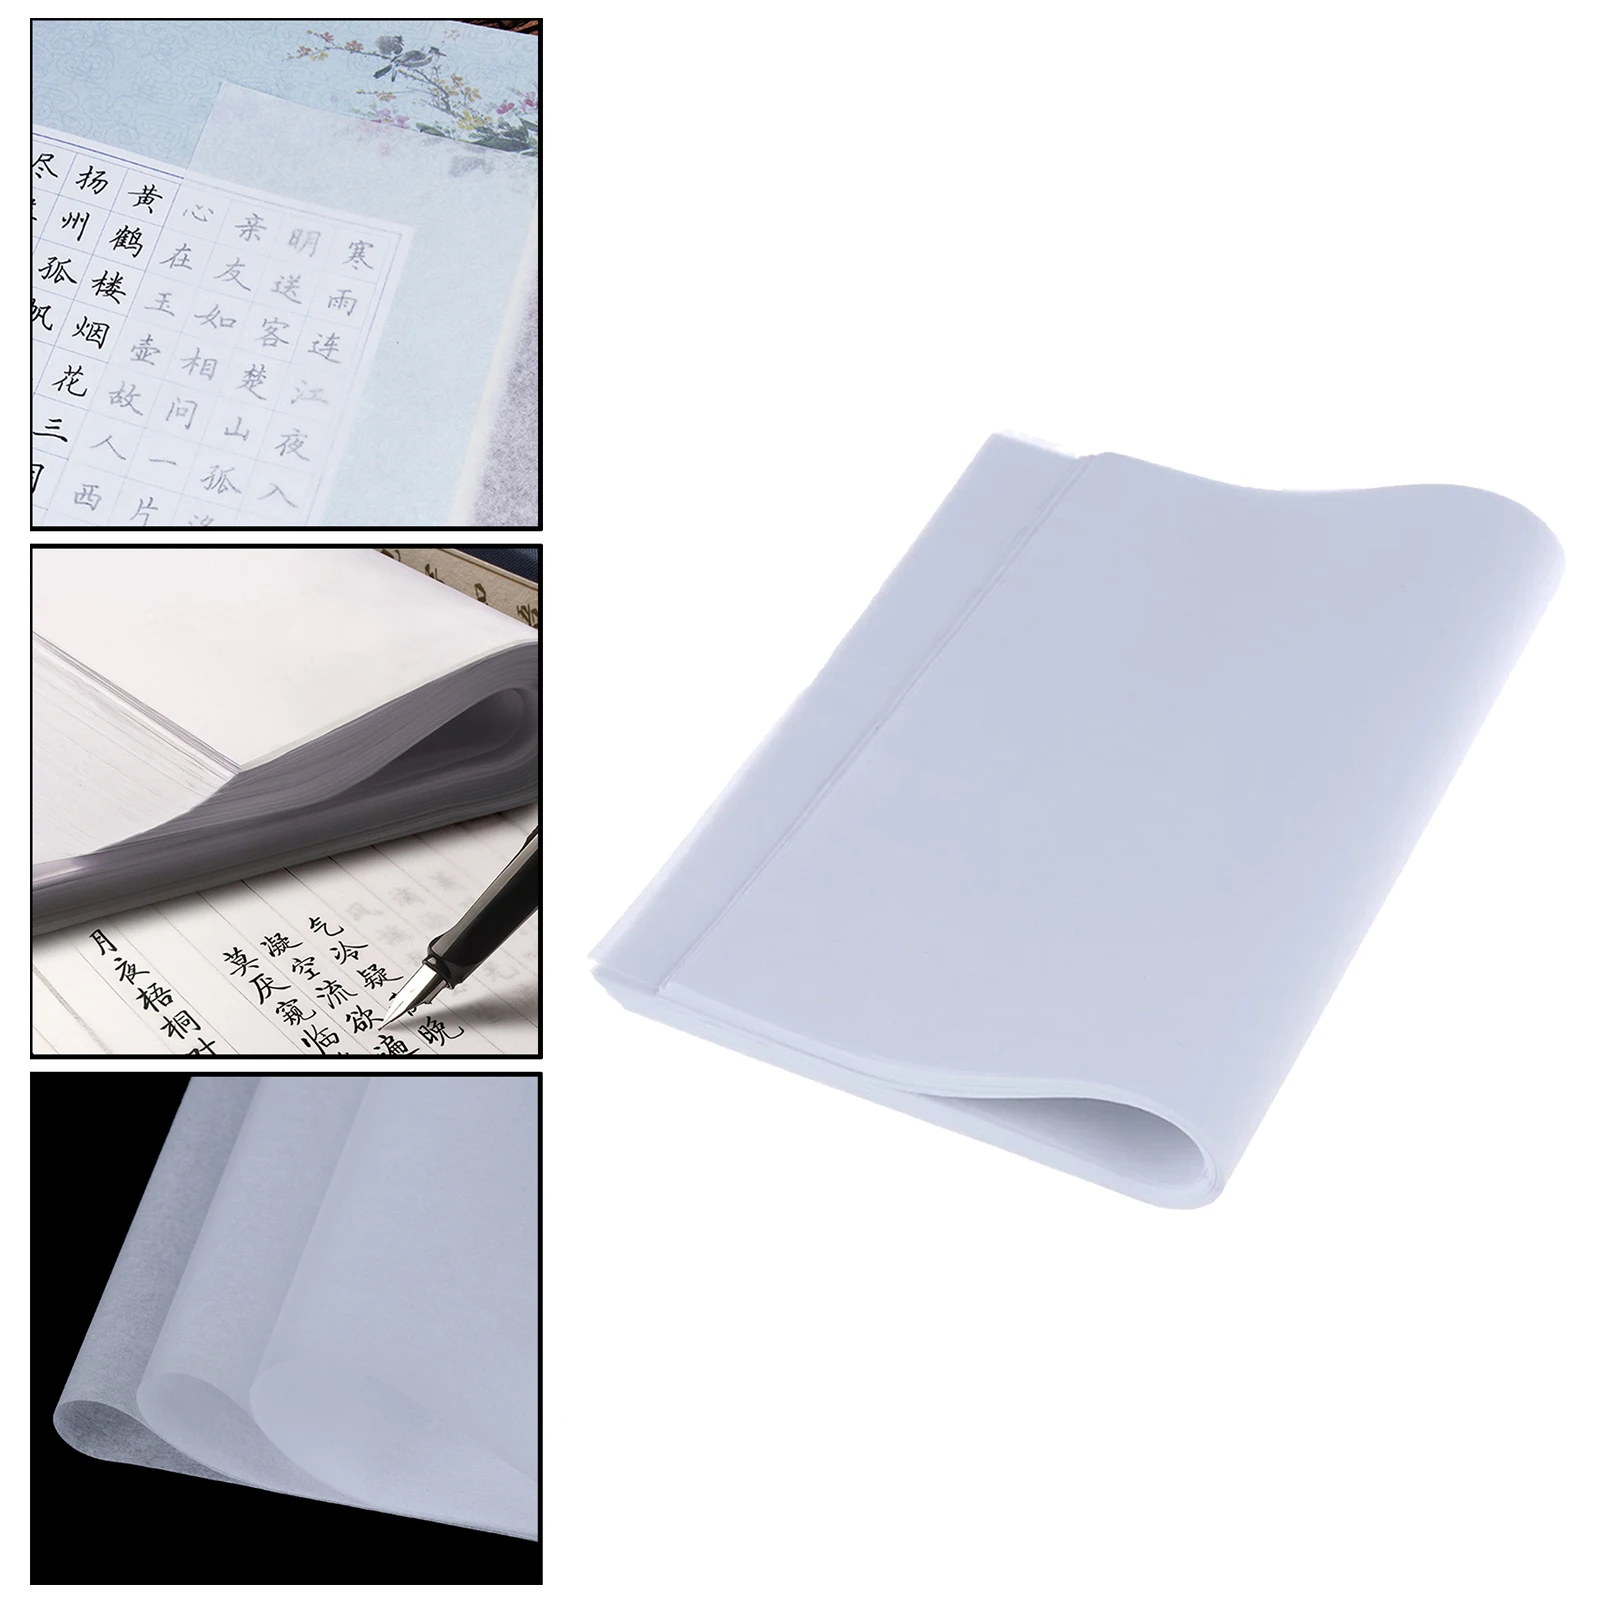 500x White Tracing Paper Copy Drawing Printing Sheet Clear Sketch Paper